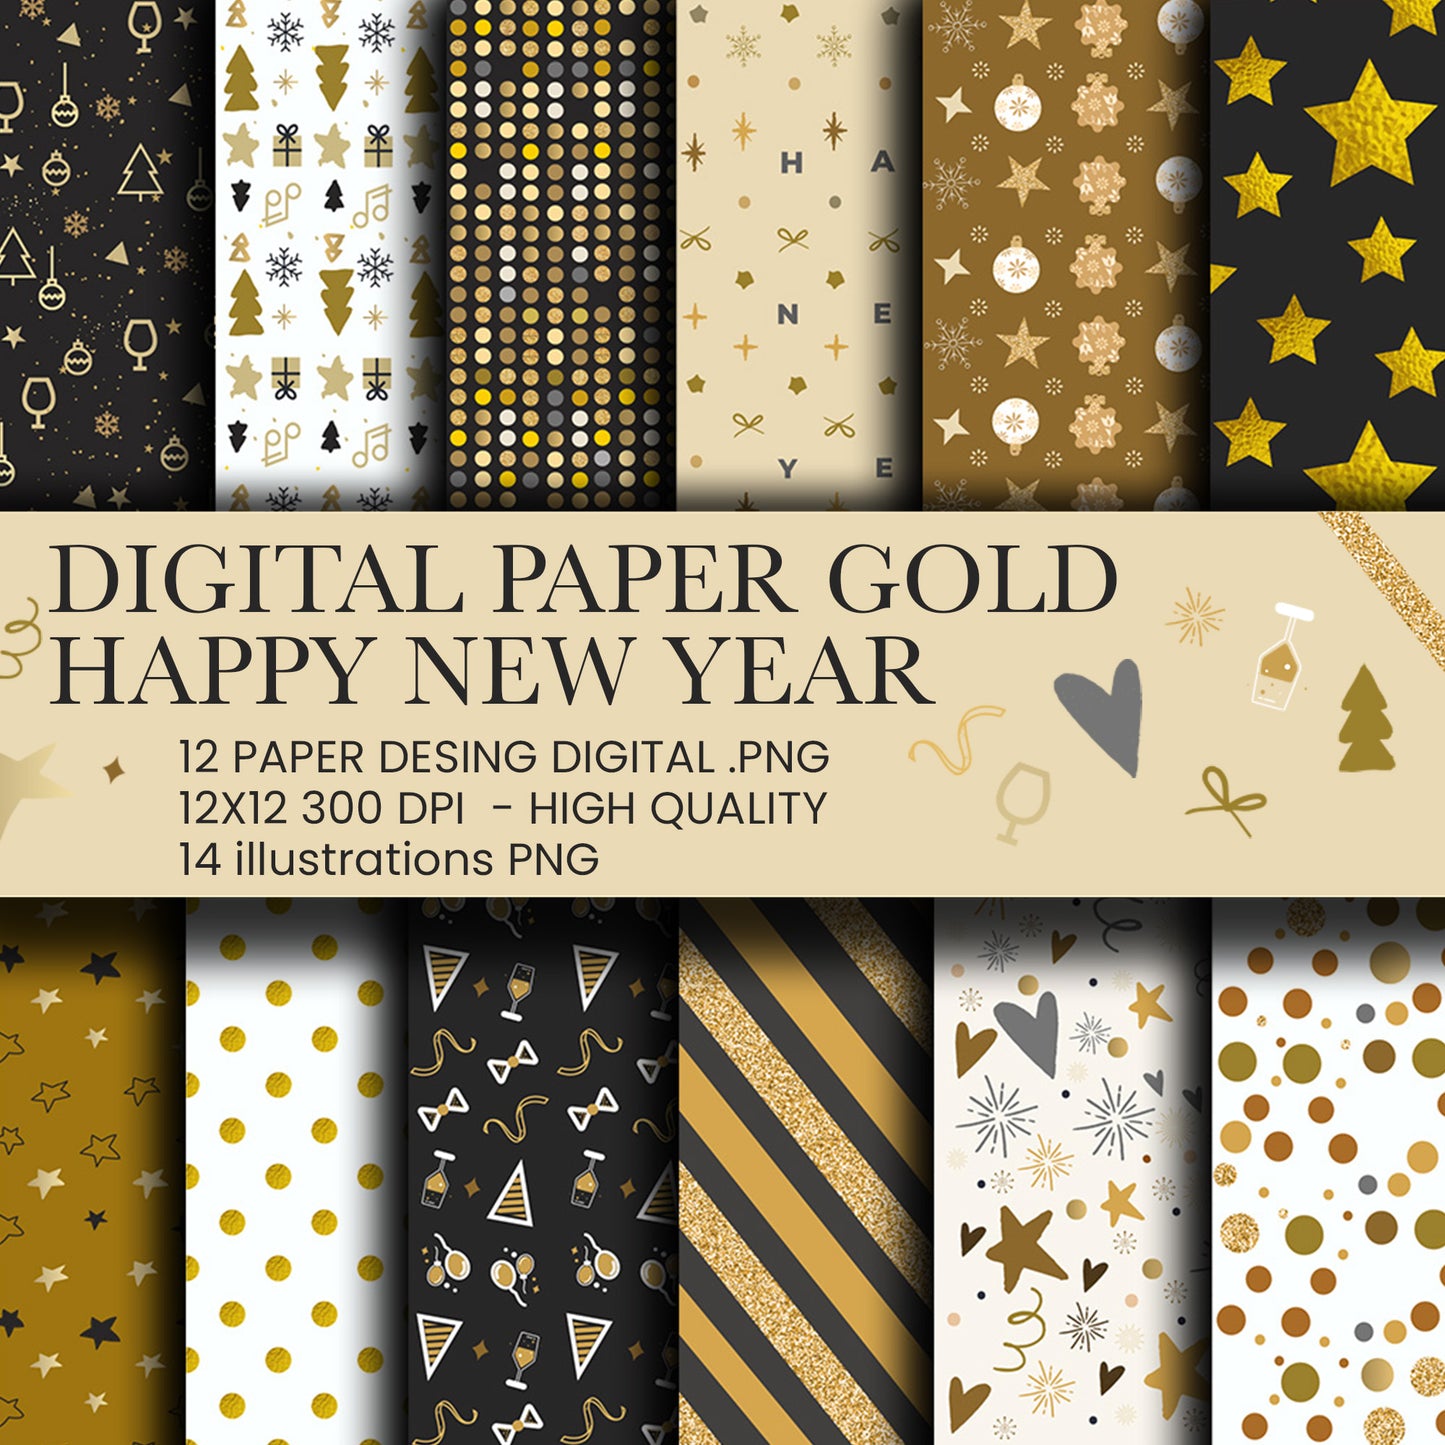 Digital Paper Gold, happy new year Digital Scrapbooking papers, Instant Download